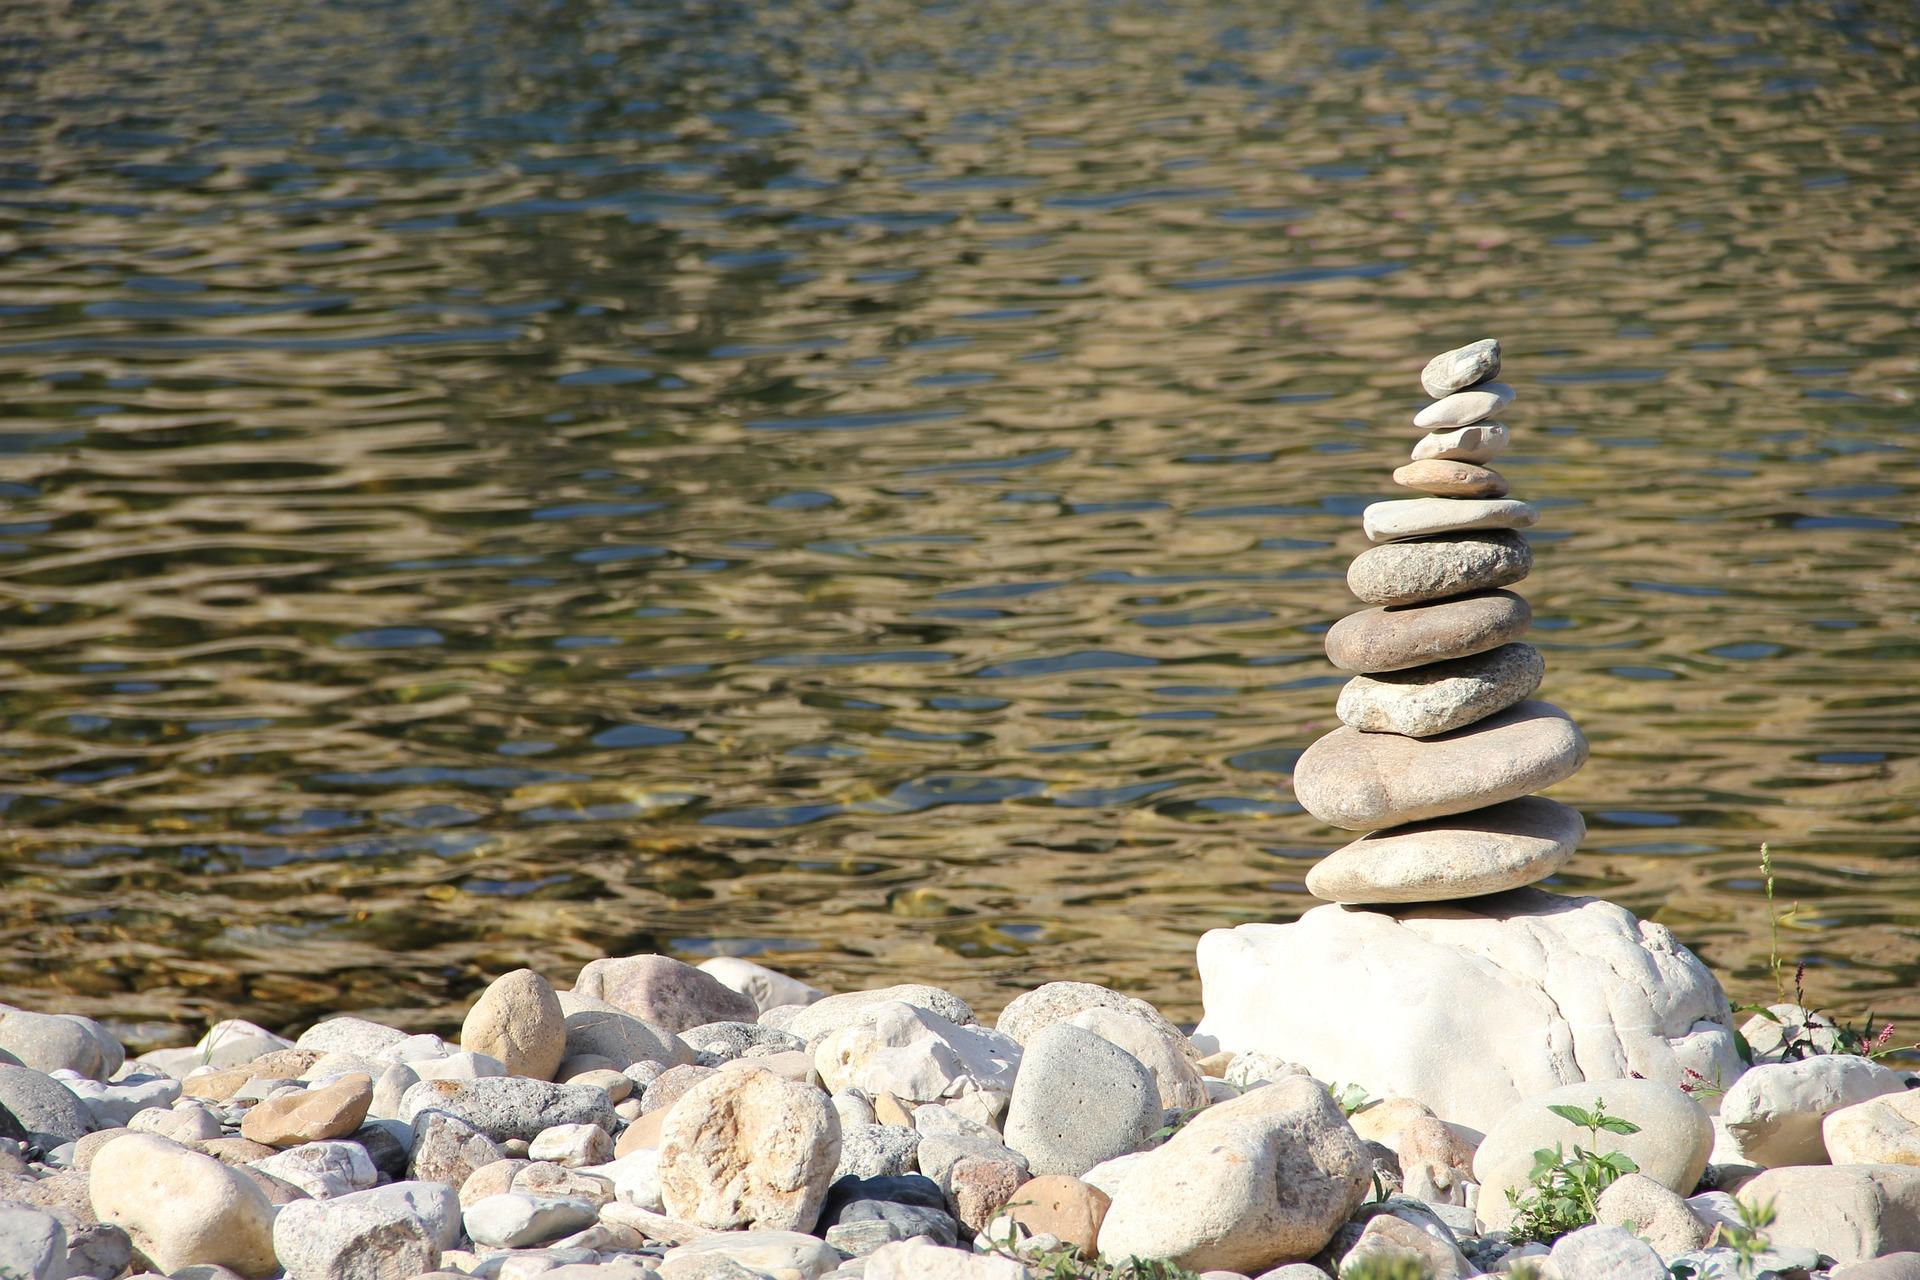 A stack of stones sits on the bank of a river